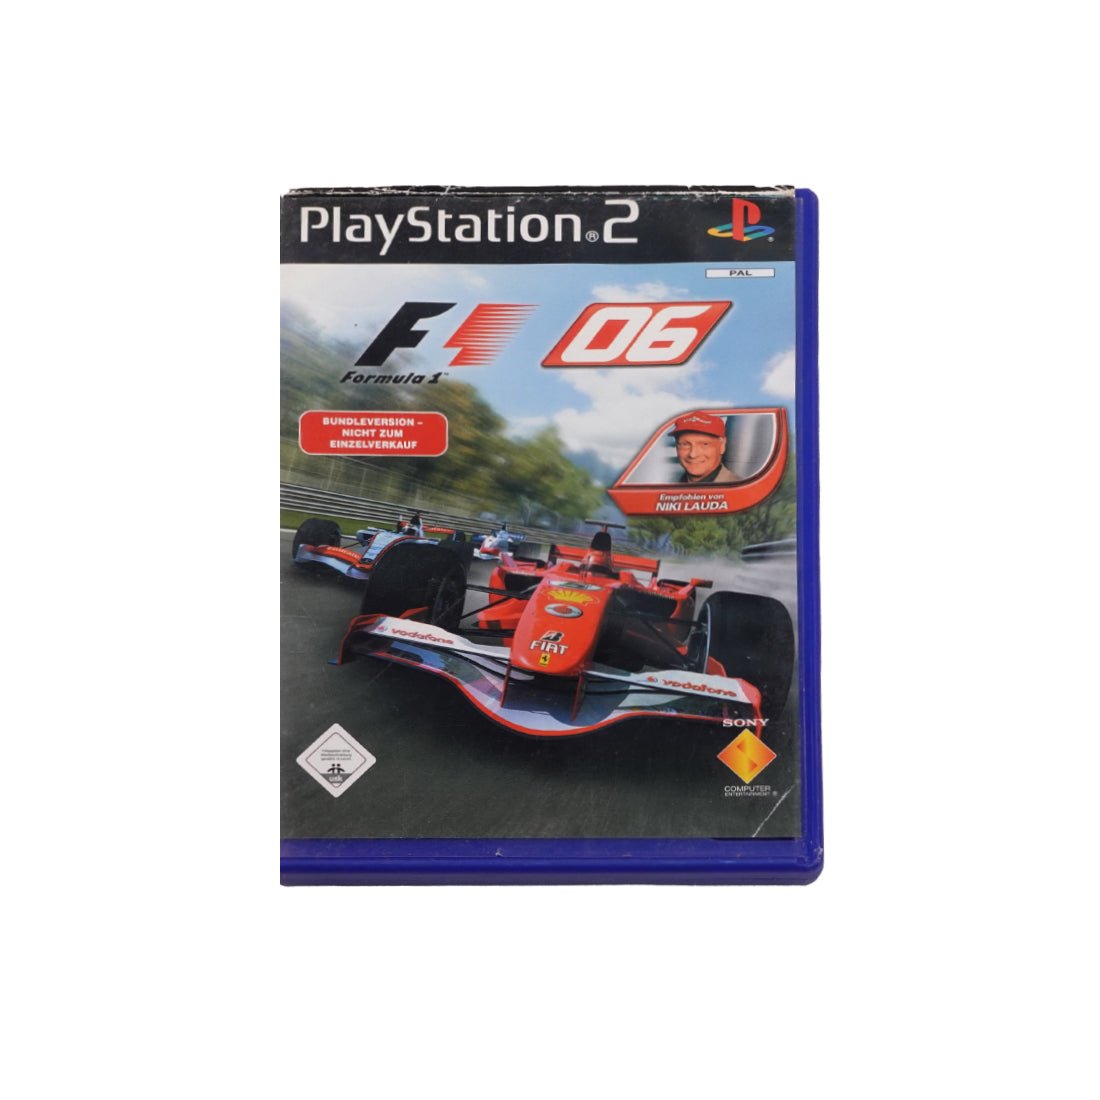 (Pre-Owned) Formula 06 German Edition - PlayStation 2 - Store 974 | ستور ٩٧٤